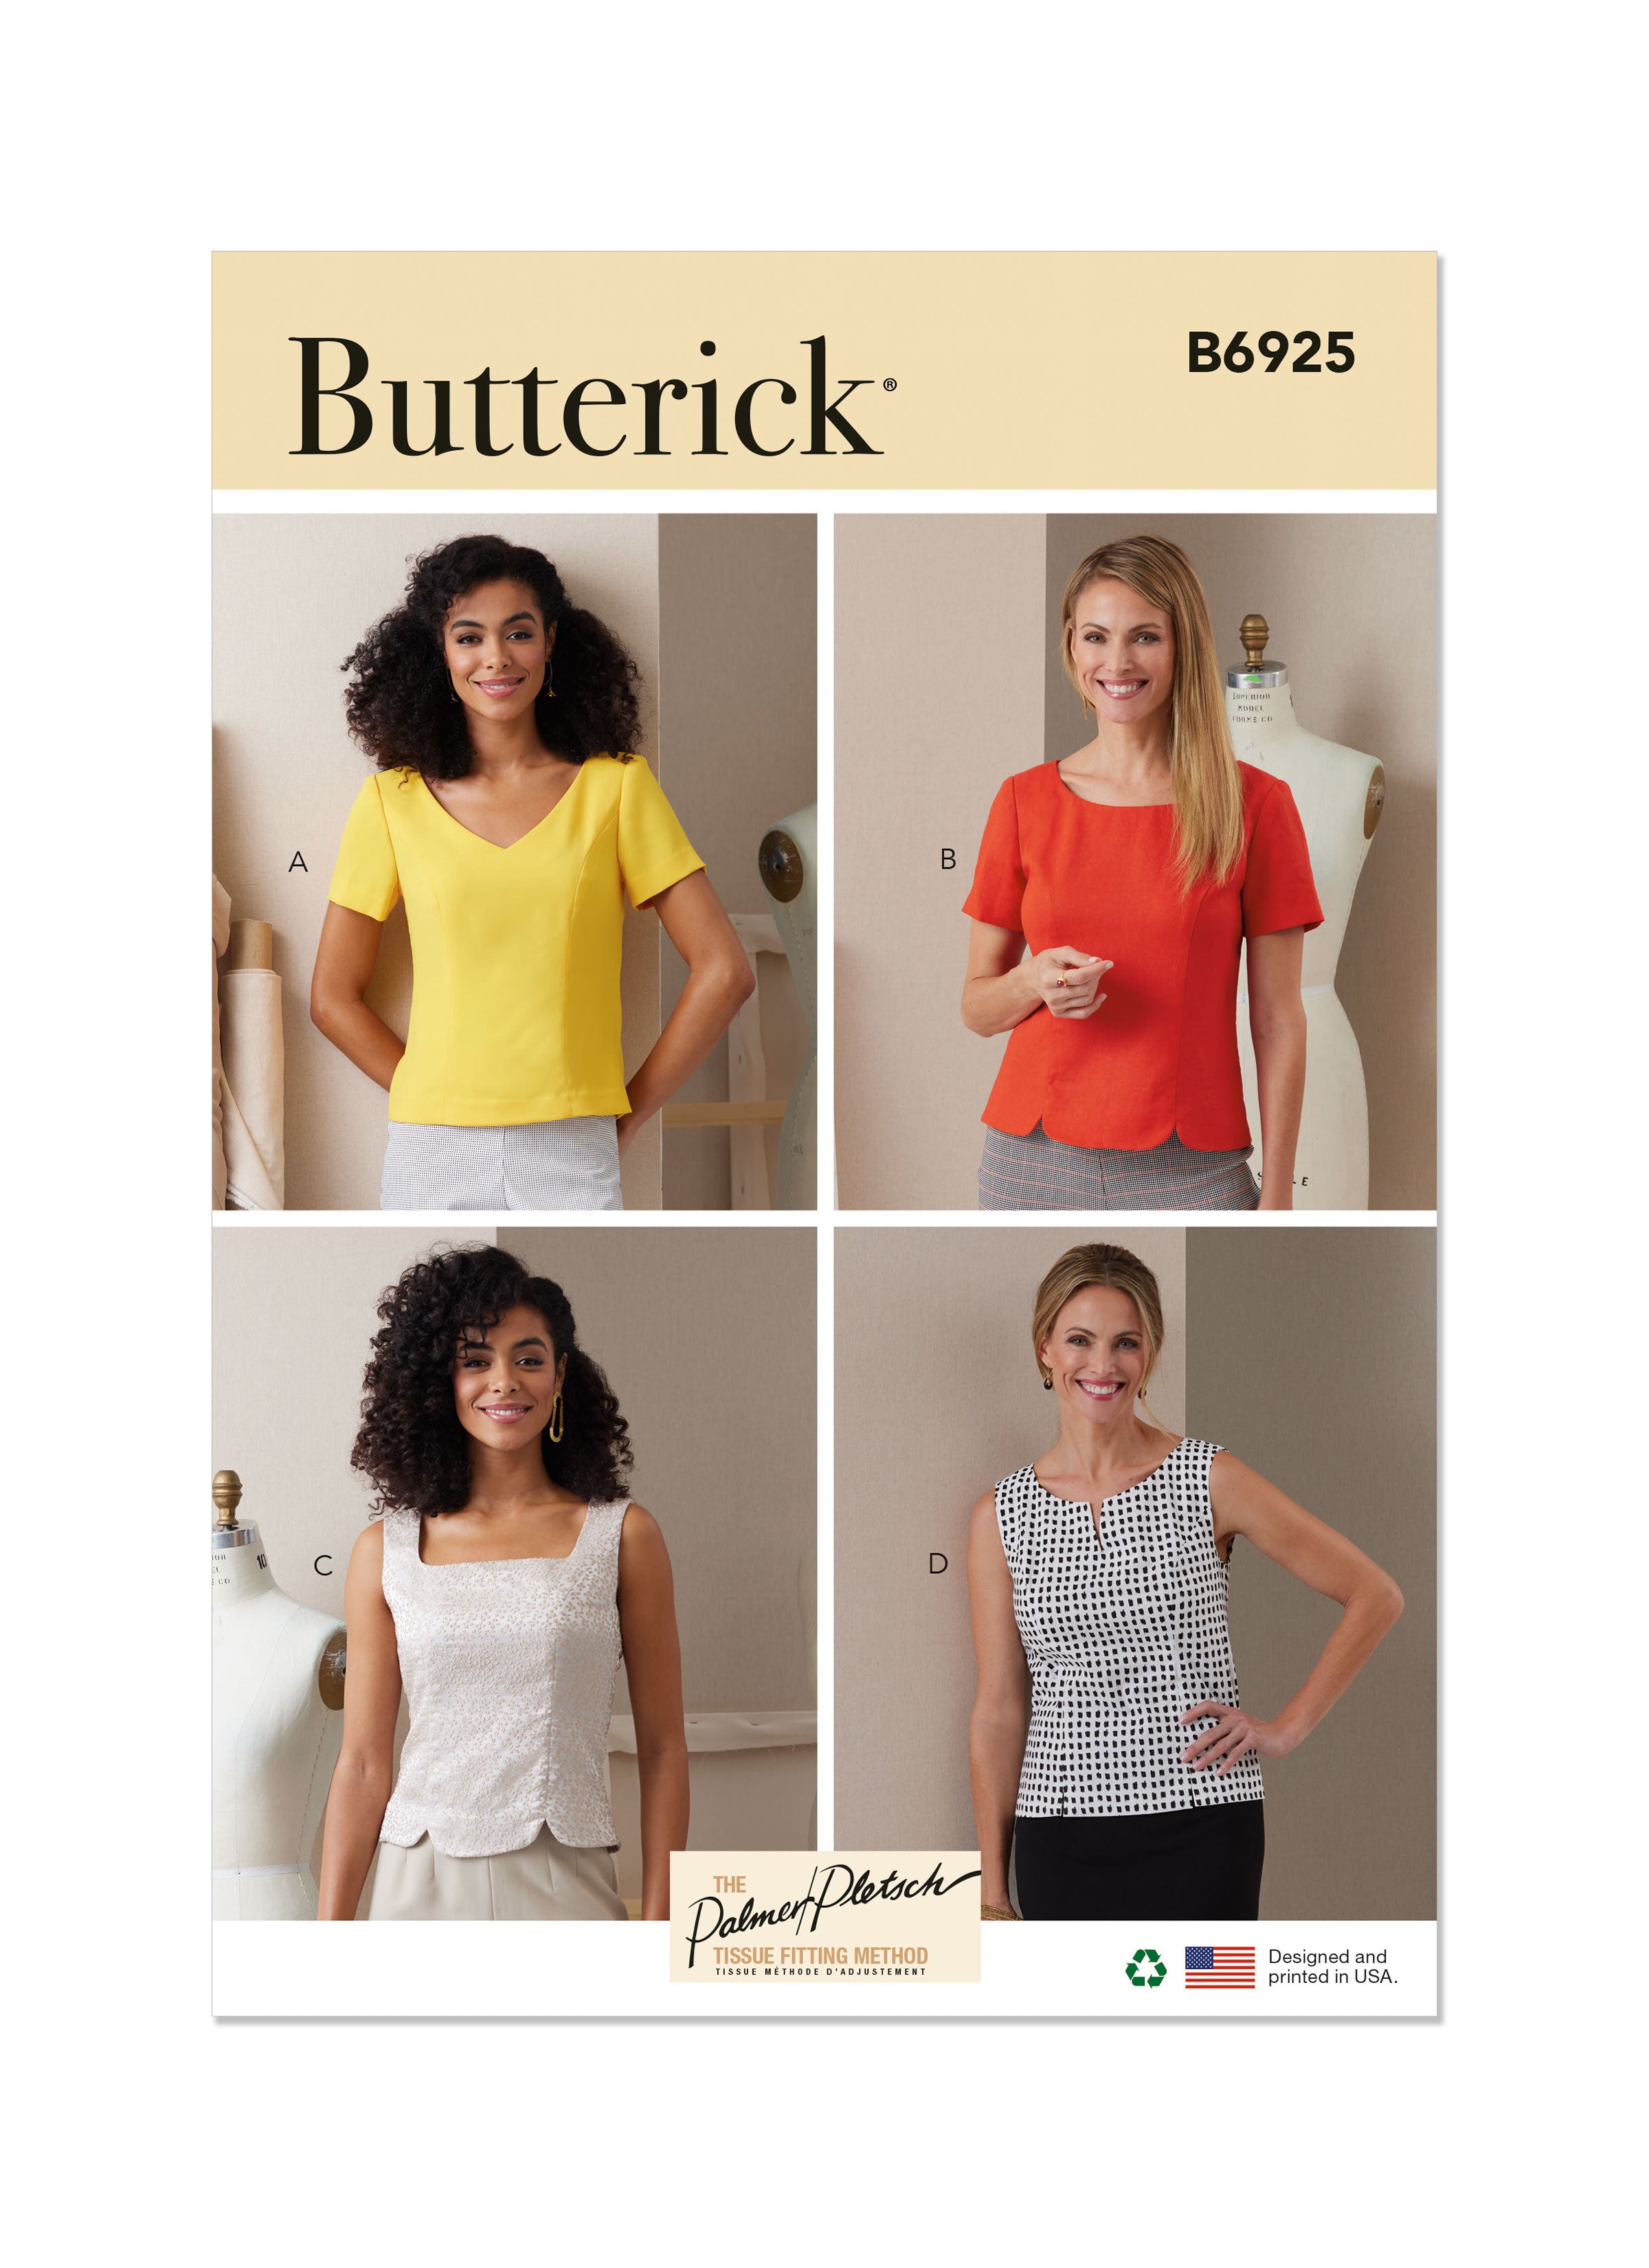 Butterick Sewing Pattern B6925 Misses' Tops By Palmer/Pletsch from Jaycotts Sewing Supplies